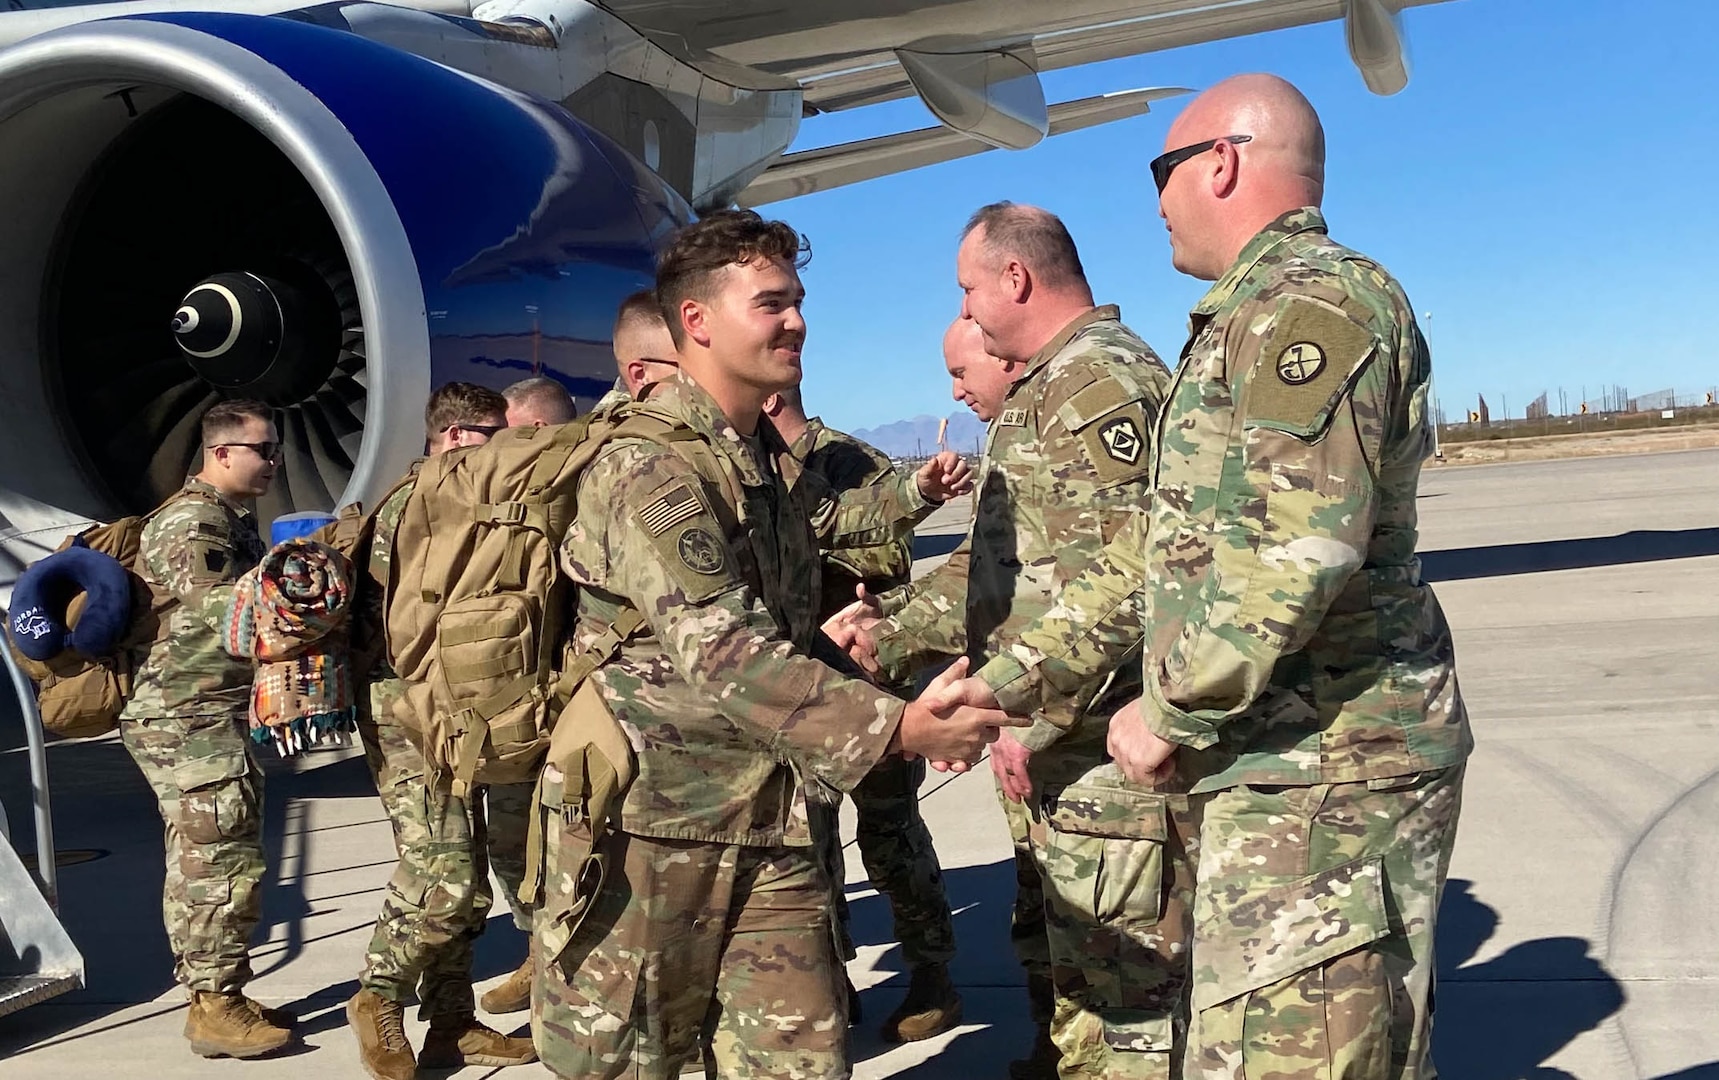 Soldiers in uniform walking down an airplane stairs ramp. carrying bags, and shaking hands with Soldier leadership. It's during the day with bright sunshine and a bright blue sky. The soldiers are various races, ages and genders.